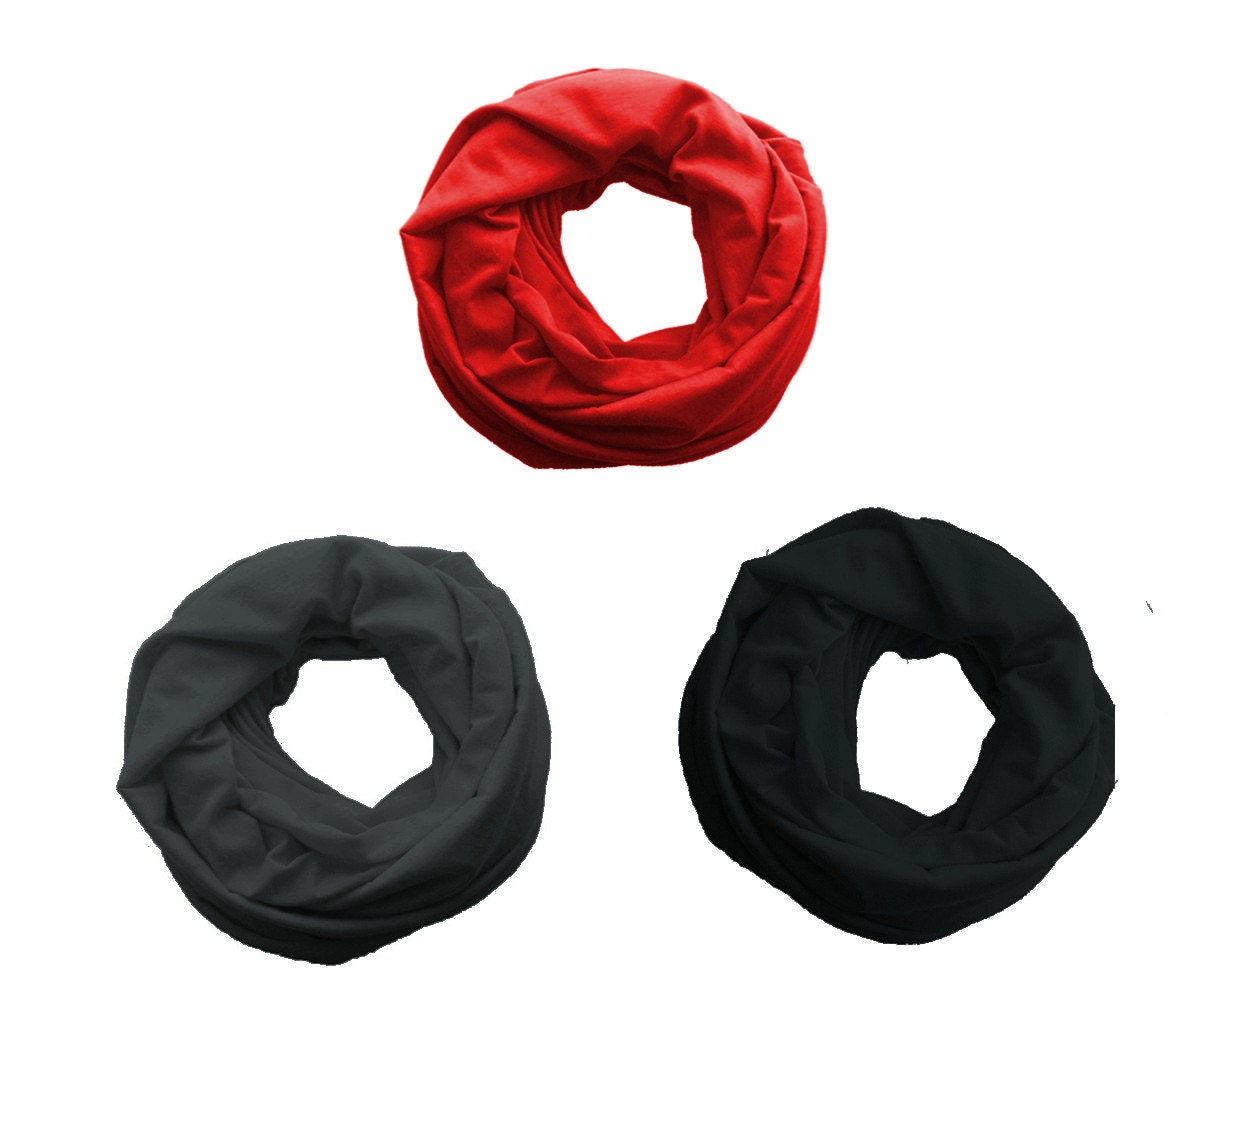 TODDLER Infinity Scarf, Kids Loop Jersey Scarf, 2-6 years old Baby circle scarf, black, charcoal gray, red - IskraAccessories